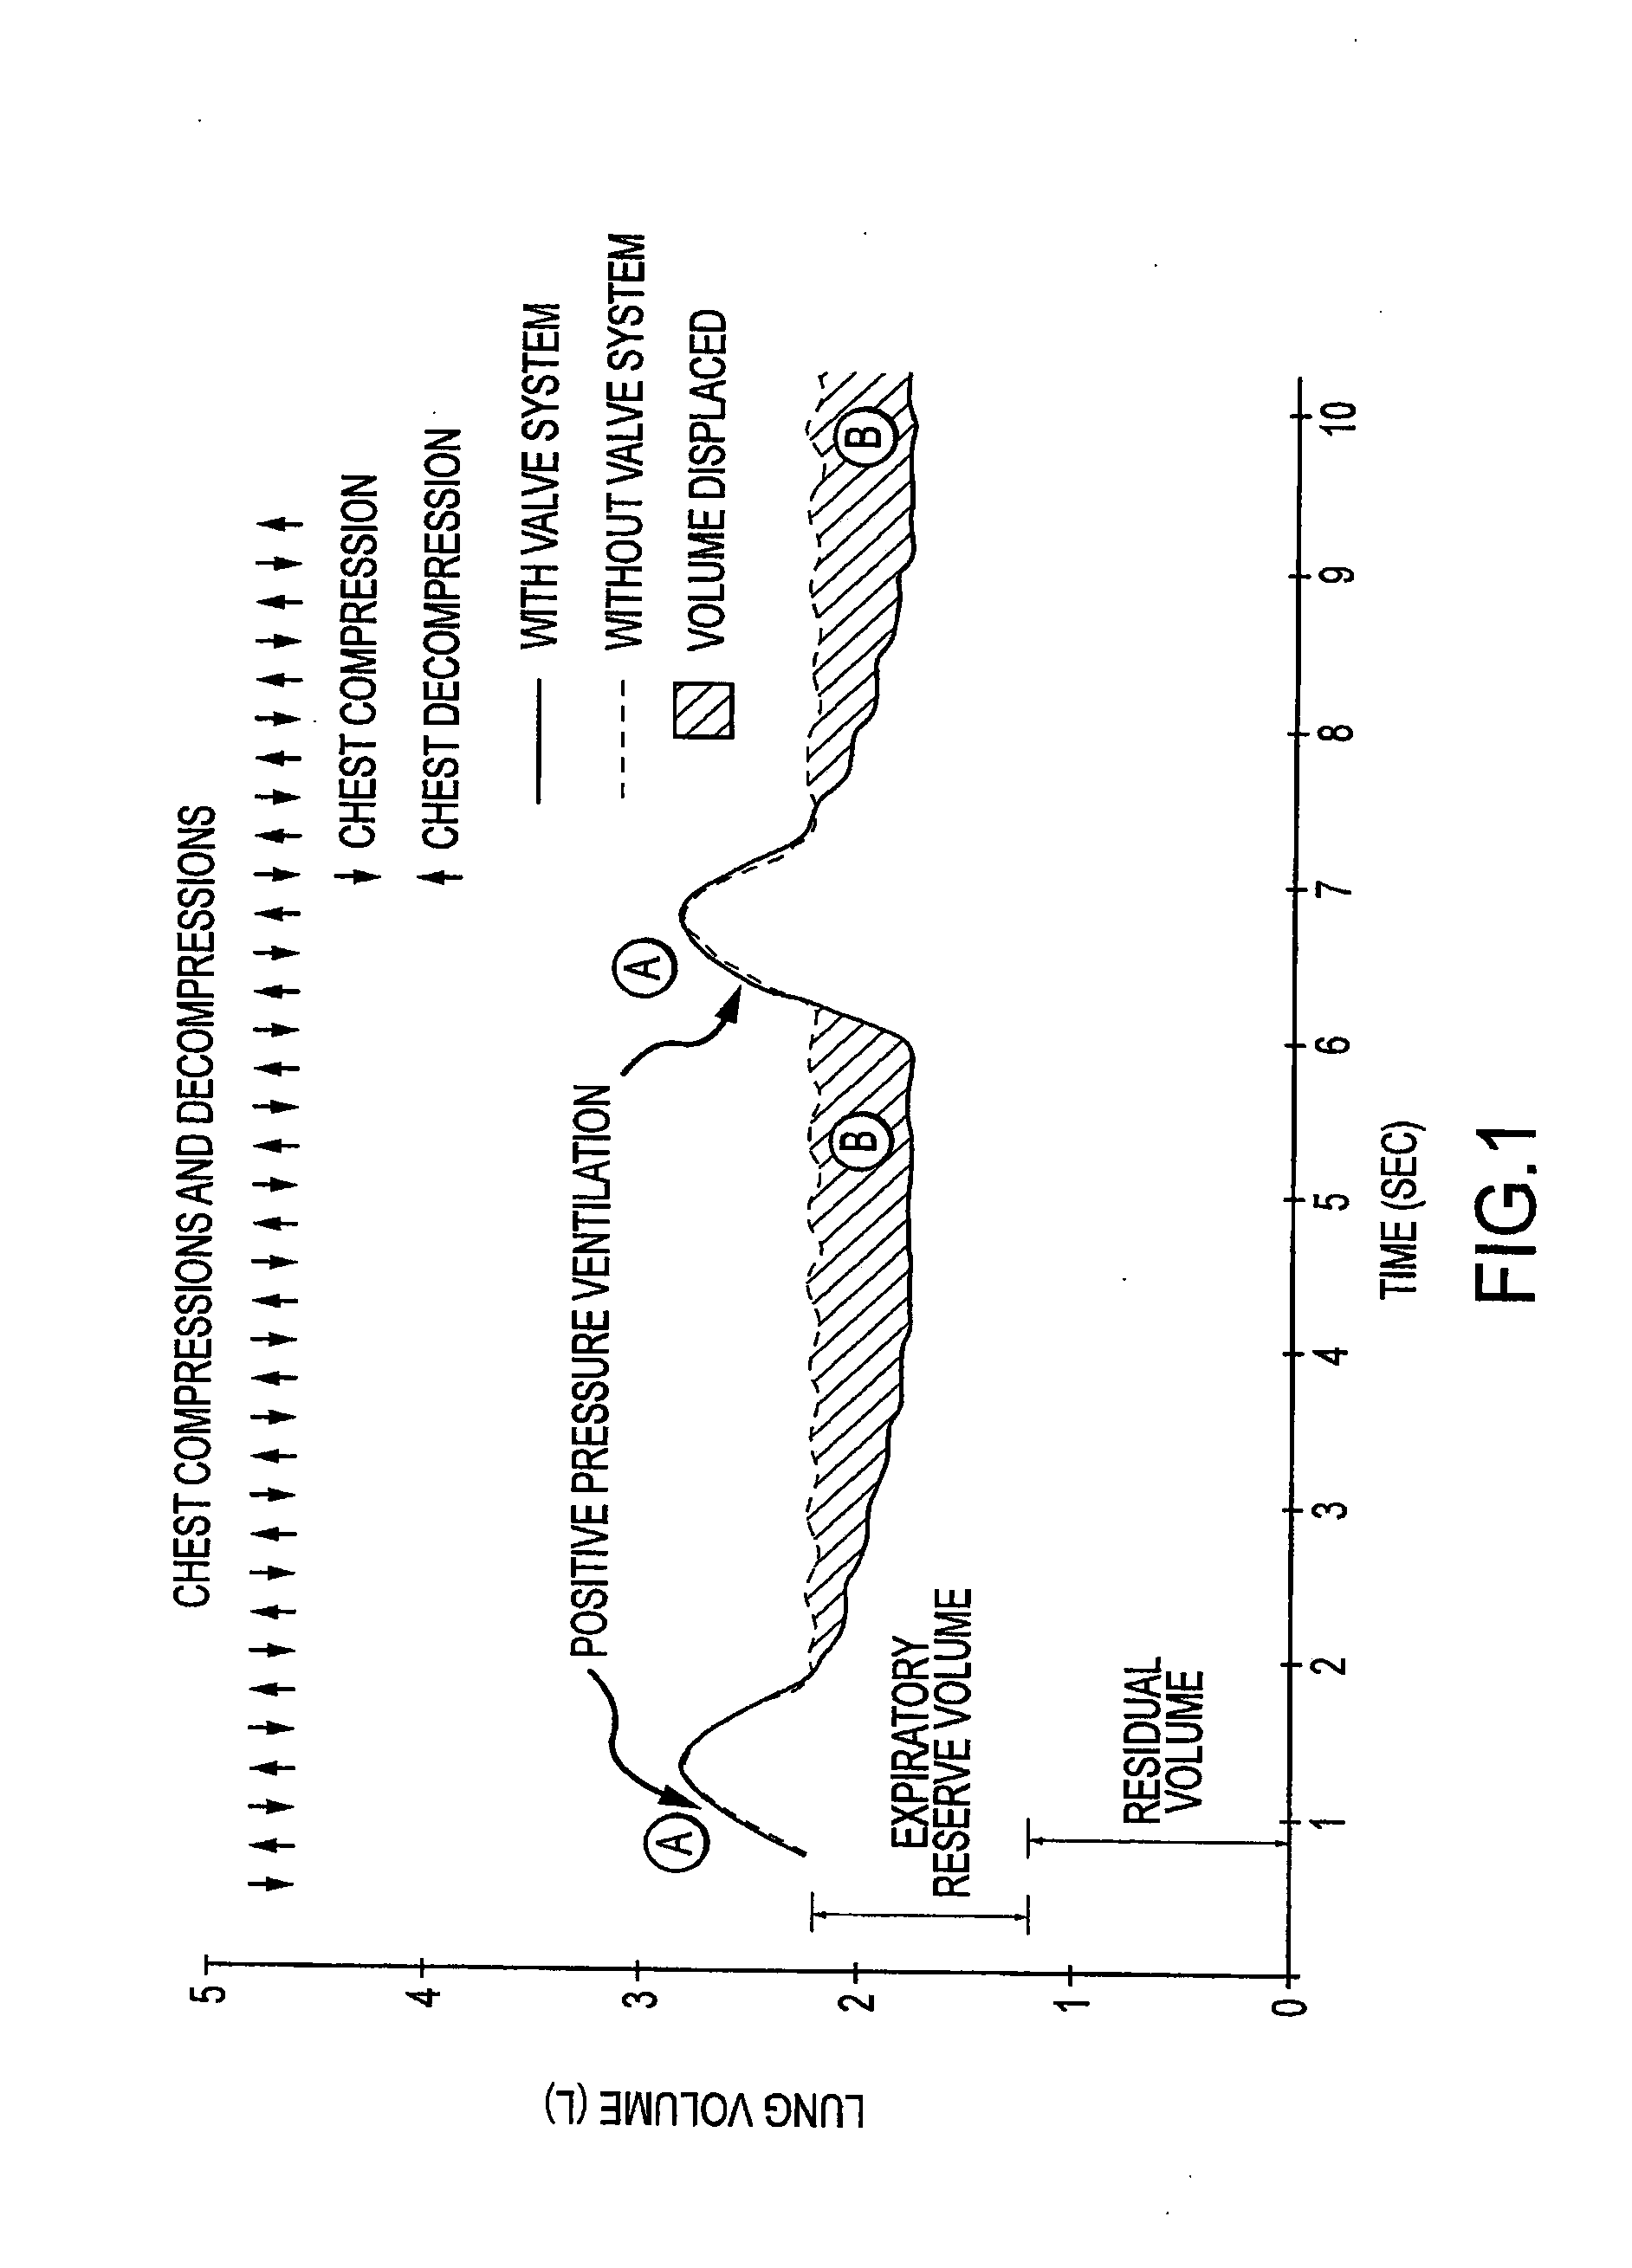 Systems and methods to increase survival with favorable neurological function after cardiac arrest